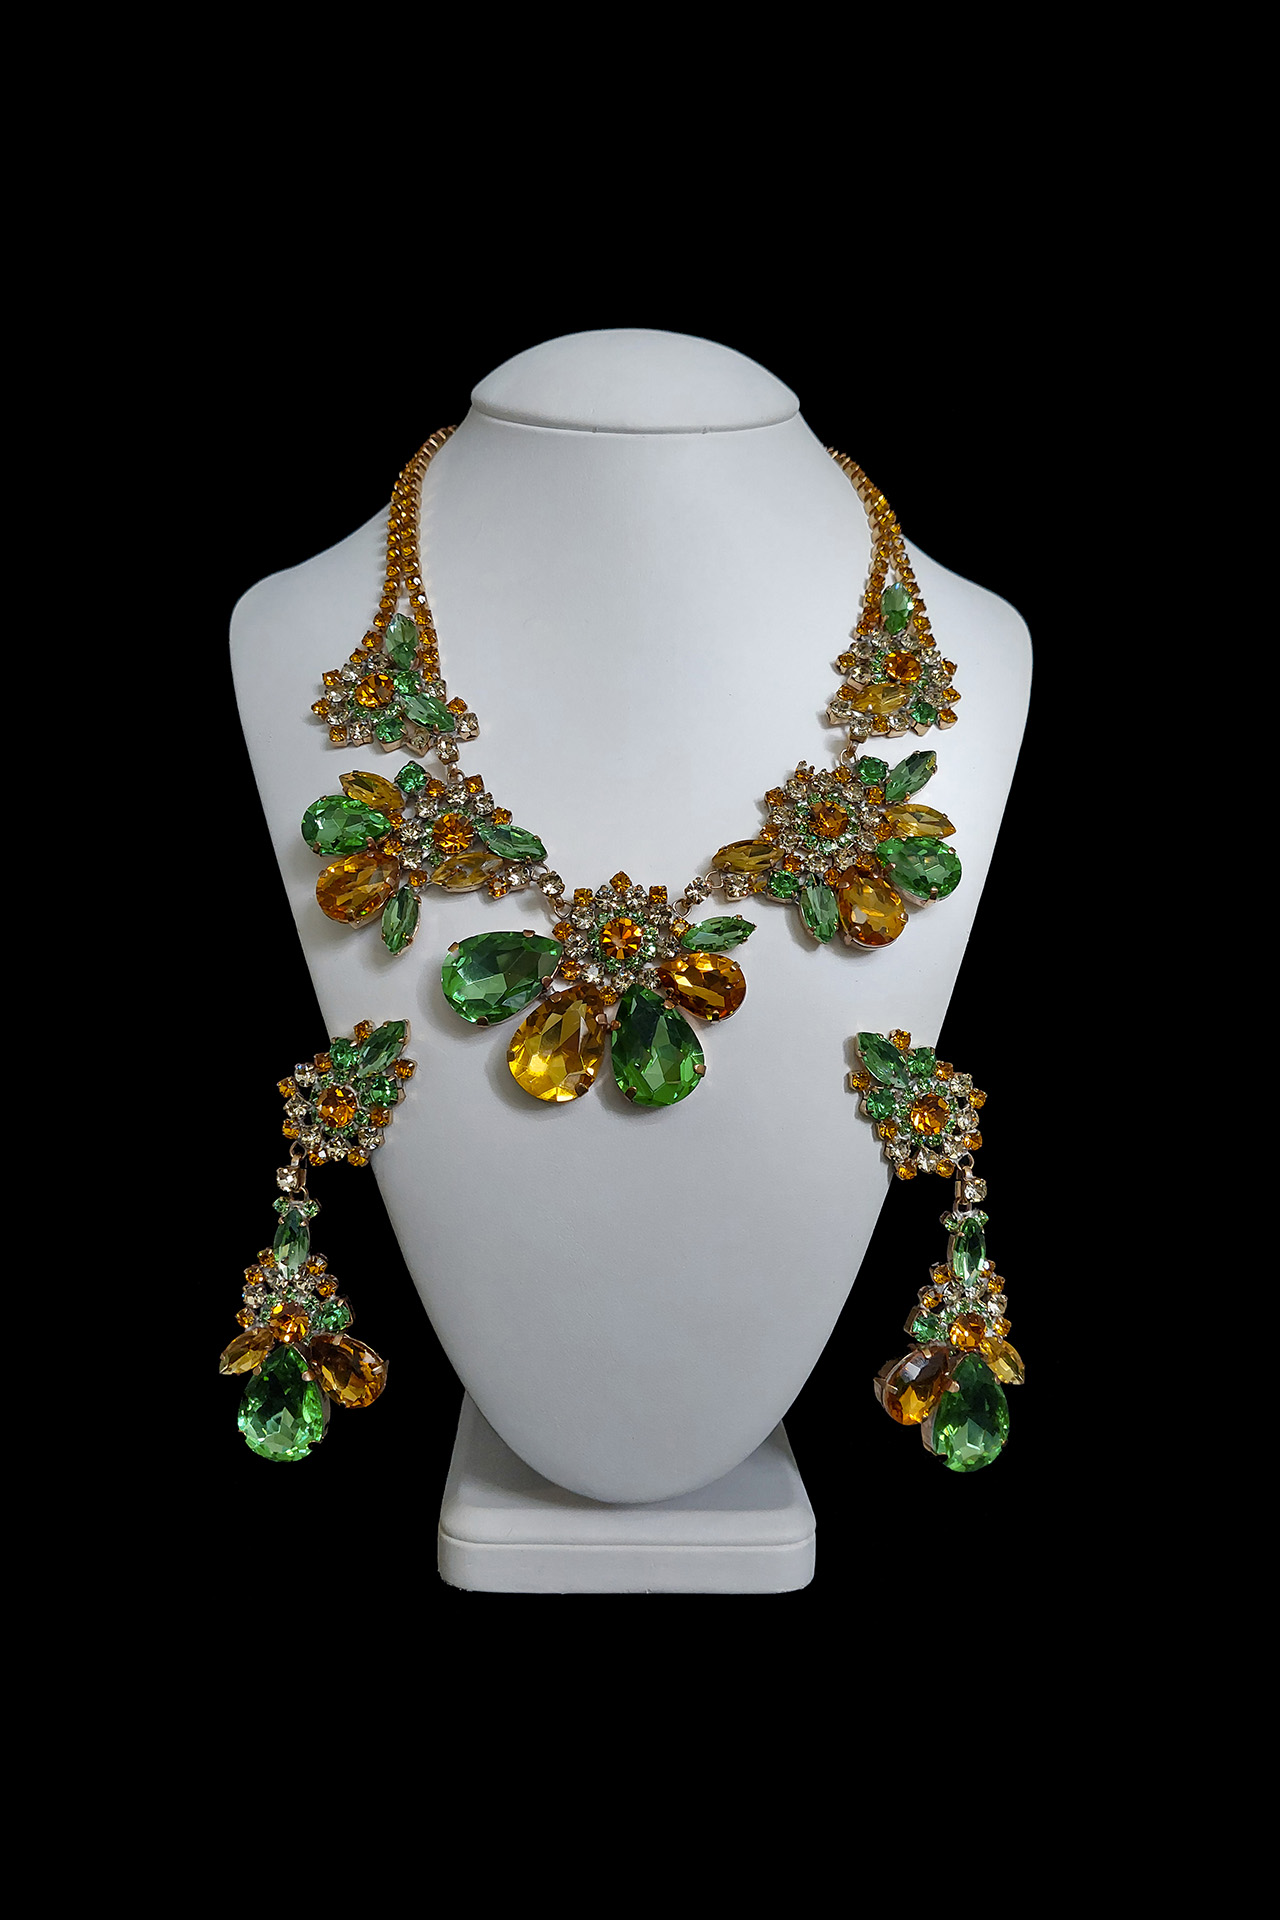 Flower necklace and earrings Parisienne from gold and green crystals